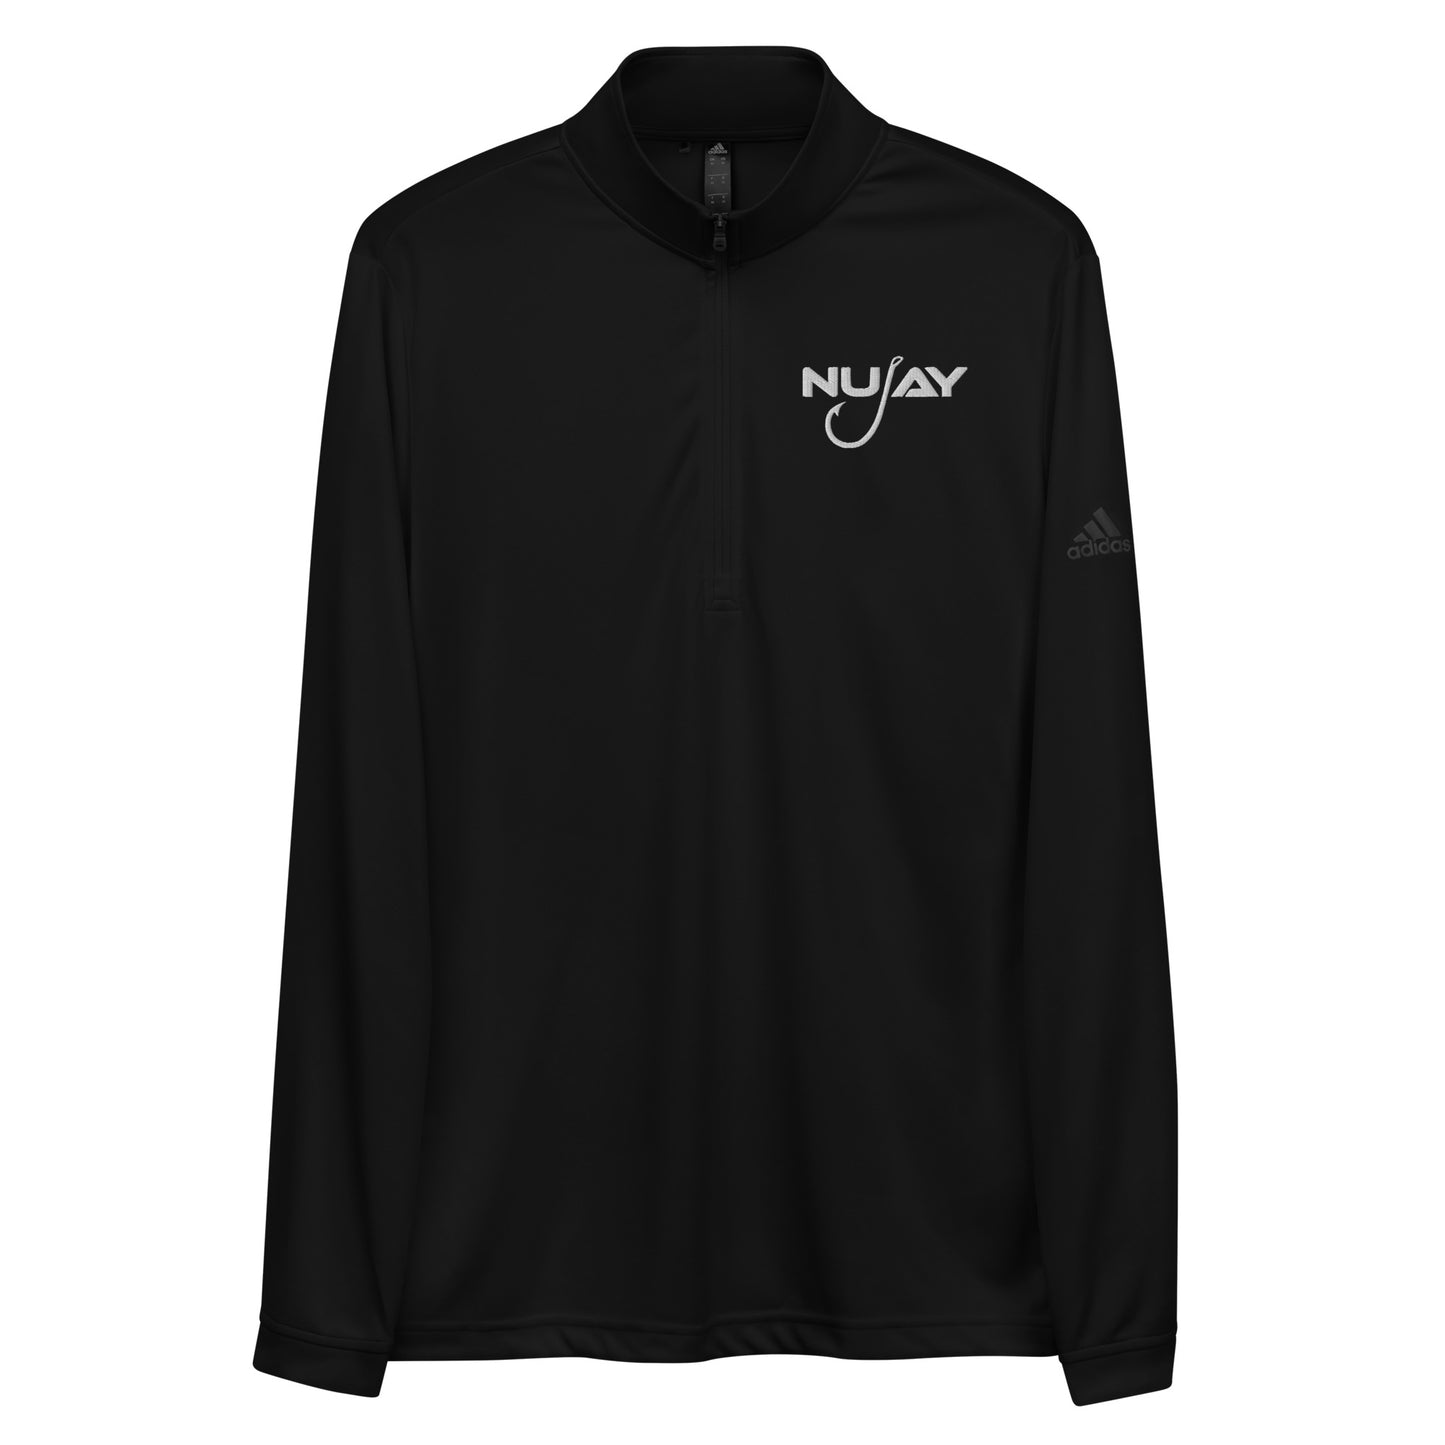 Nujay Outdoors Adidas Quarter zip pullover